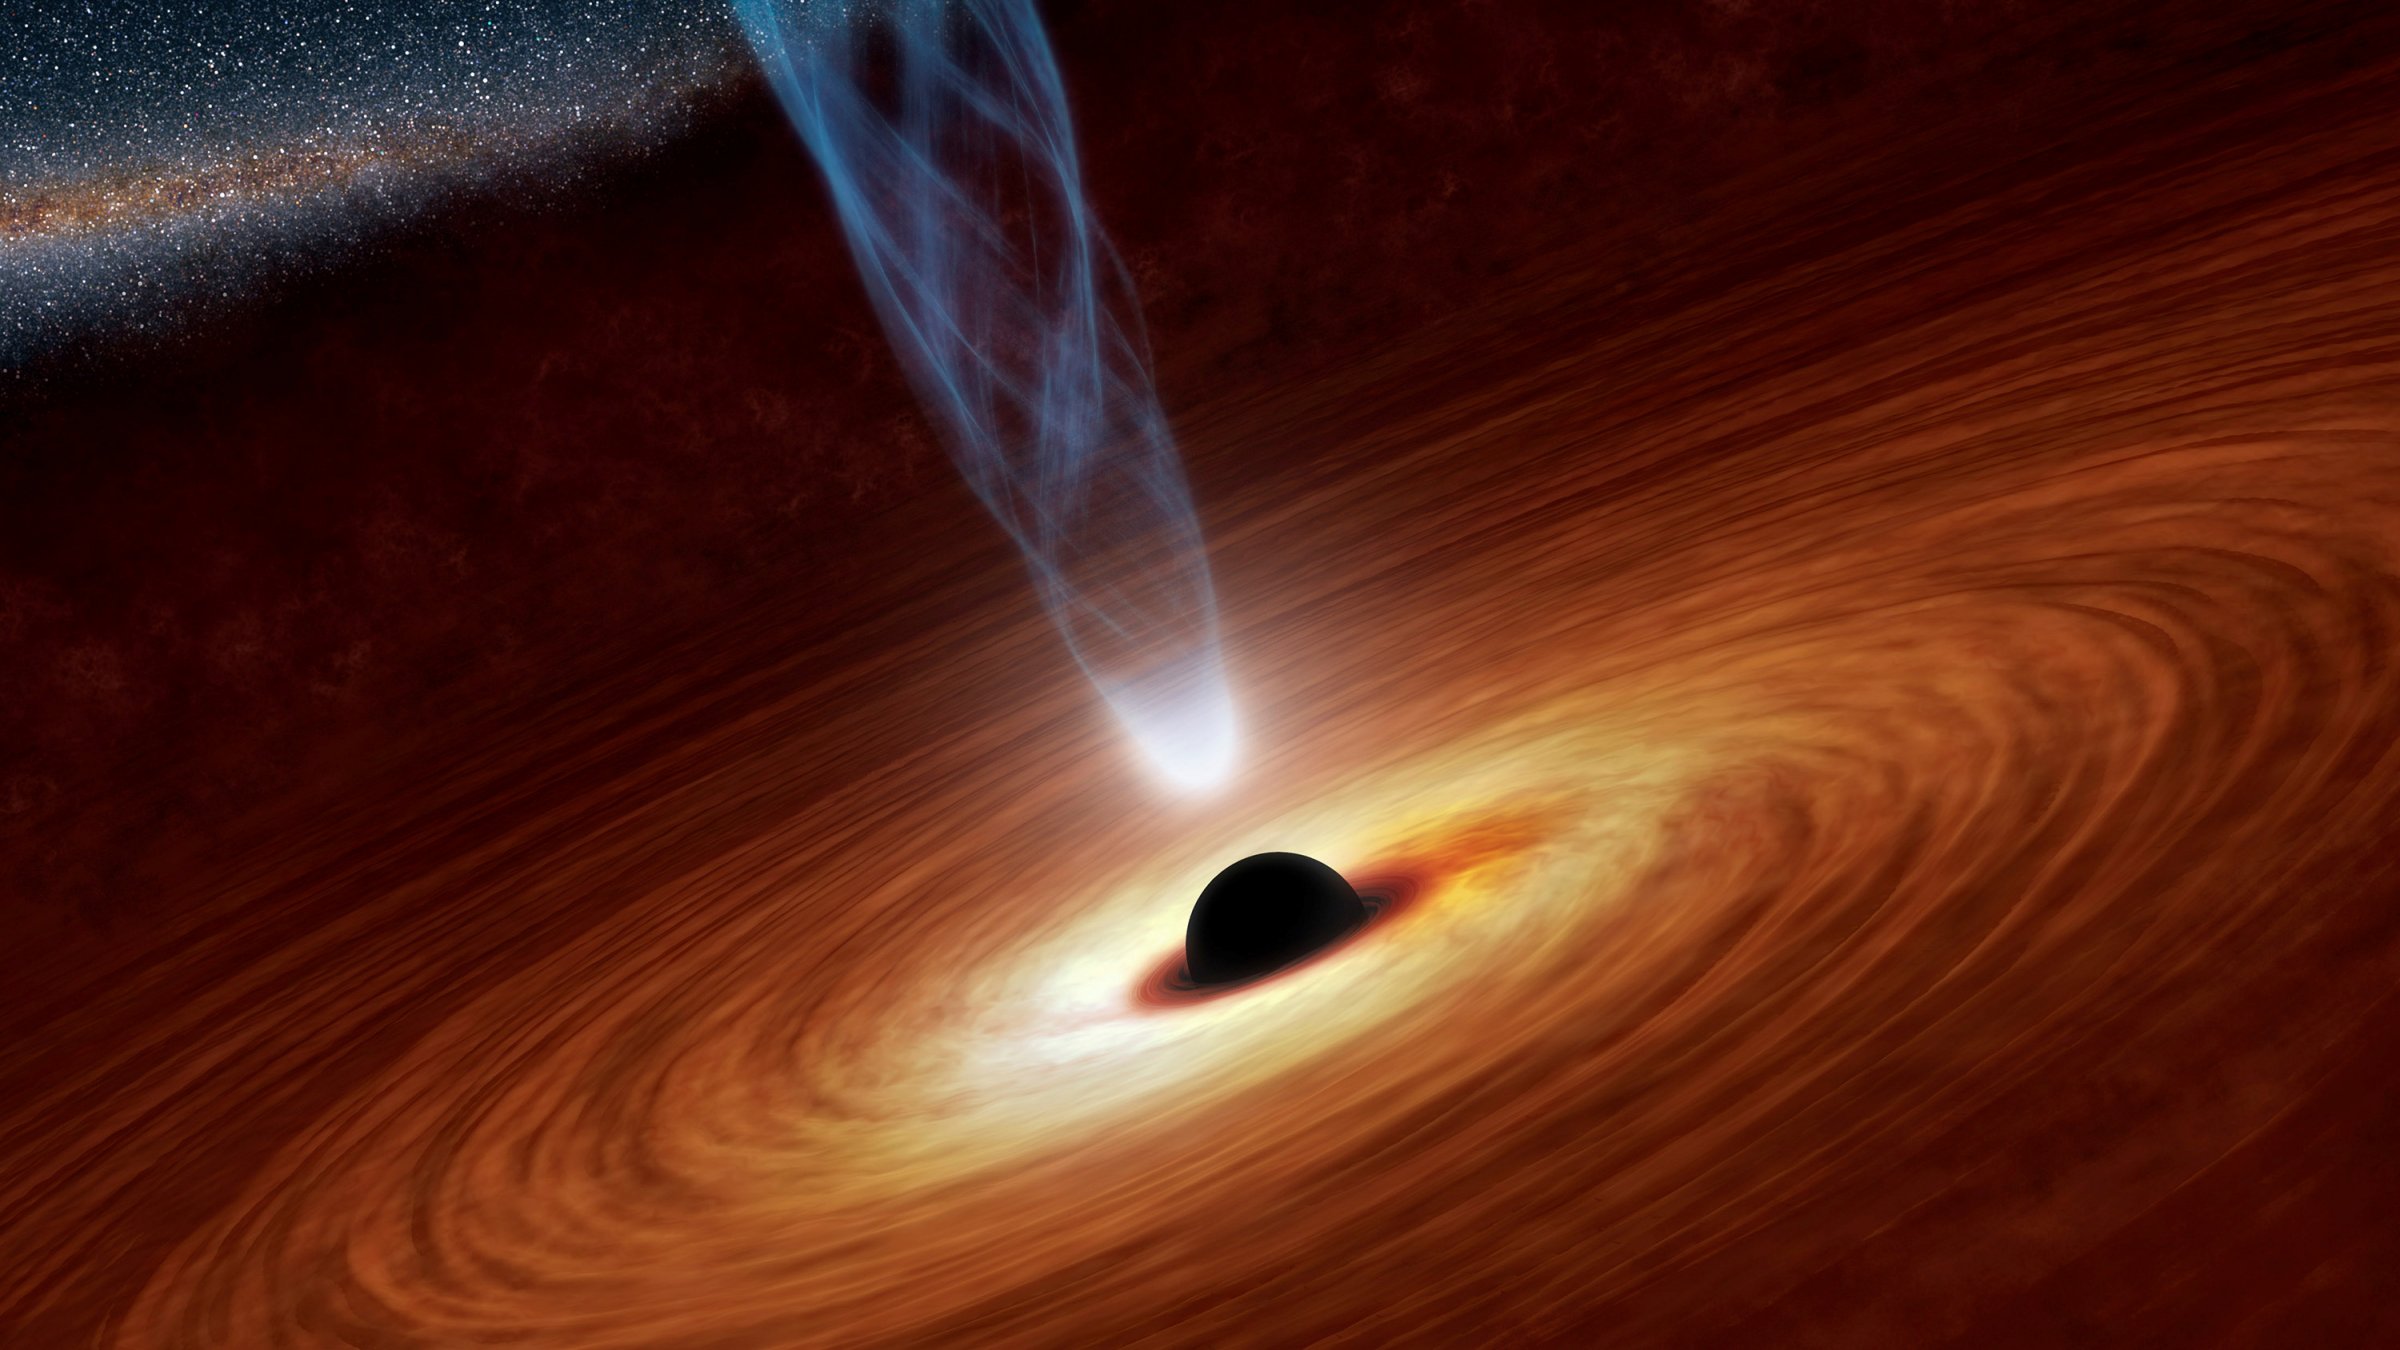  Event Horizon Telescope Released The First Ever Picture Of Black Hole